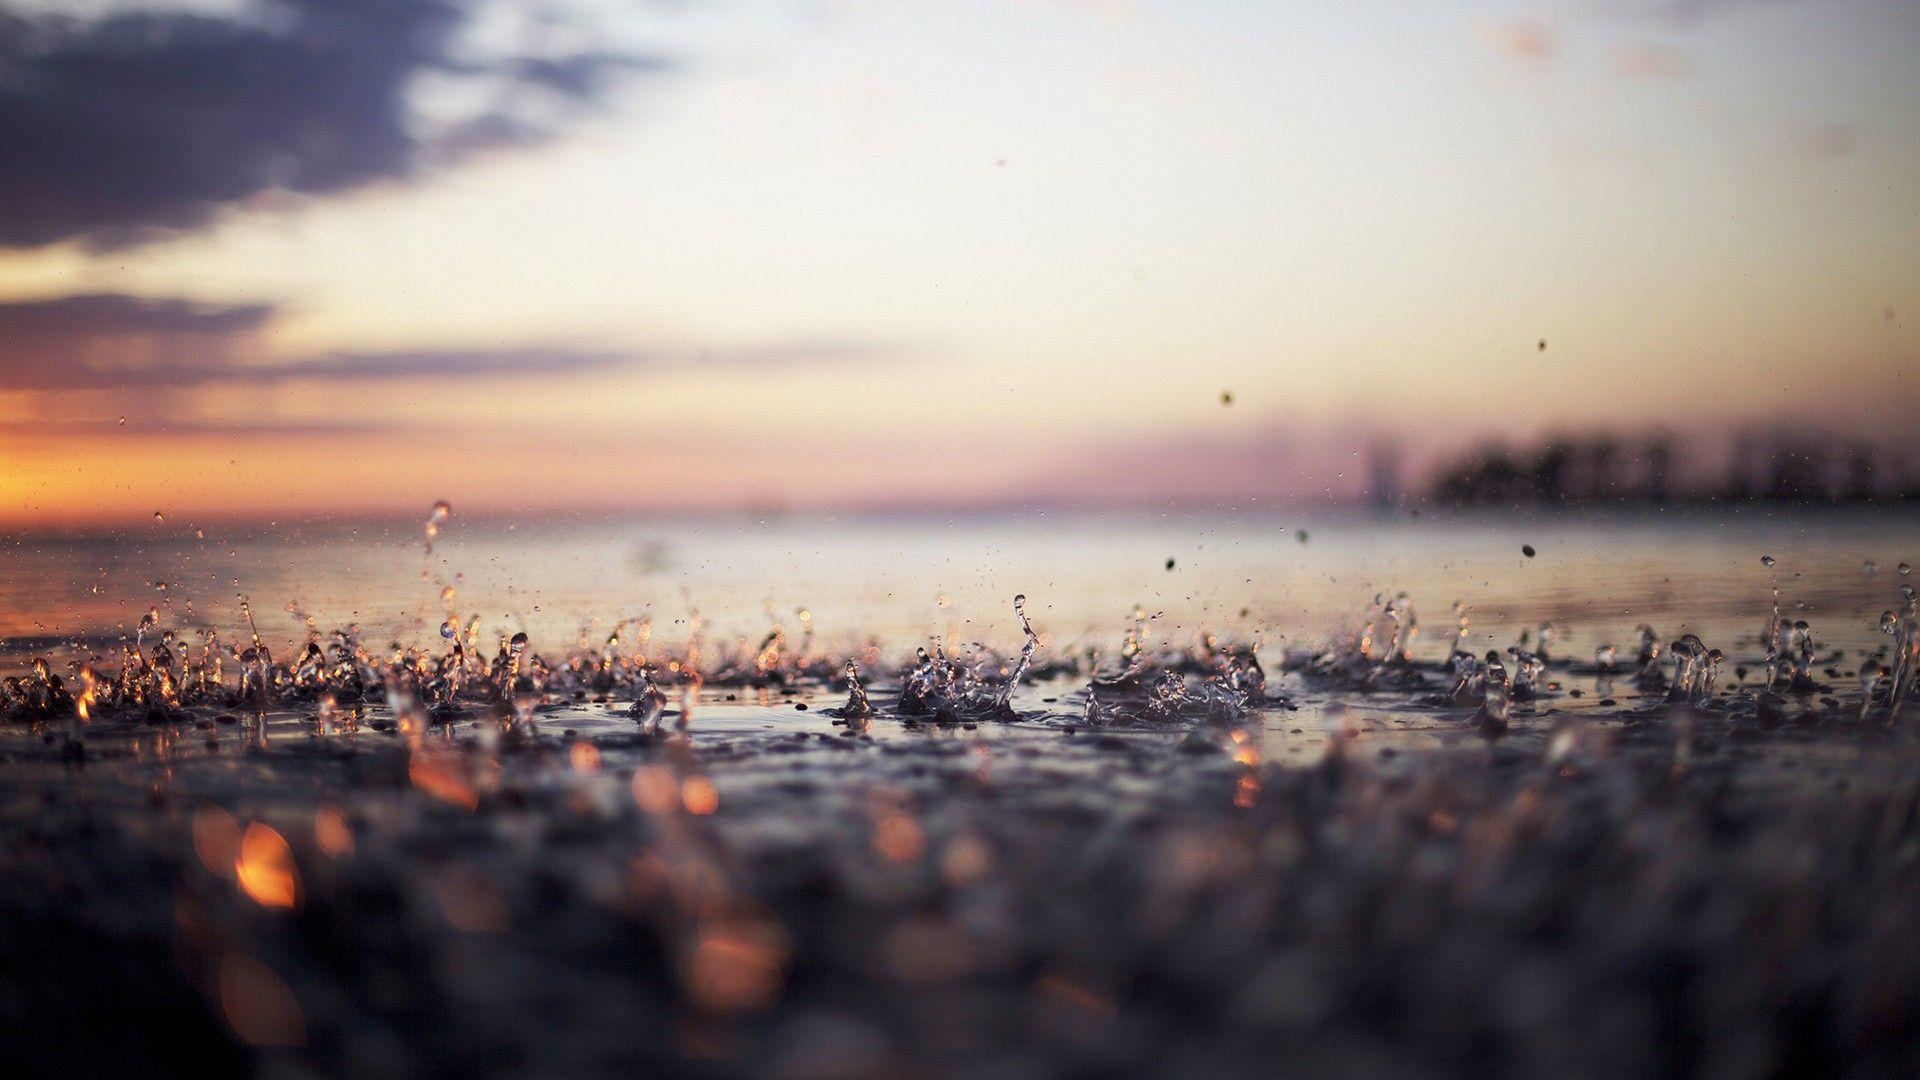 Raindrops Live Wallpaper HD Android Apps on Google Play. HD